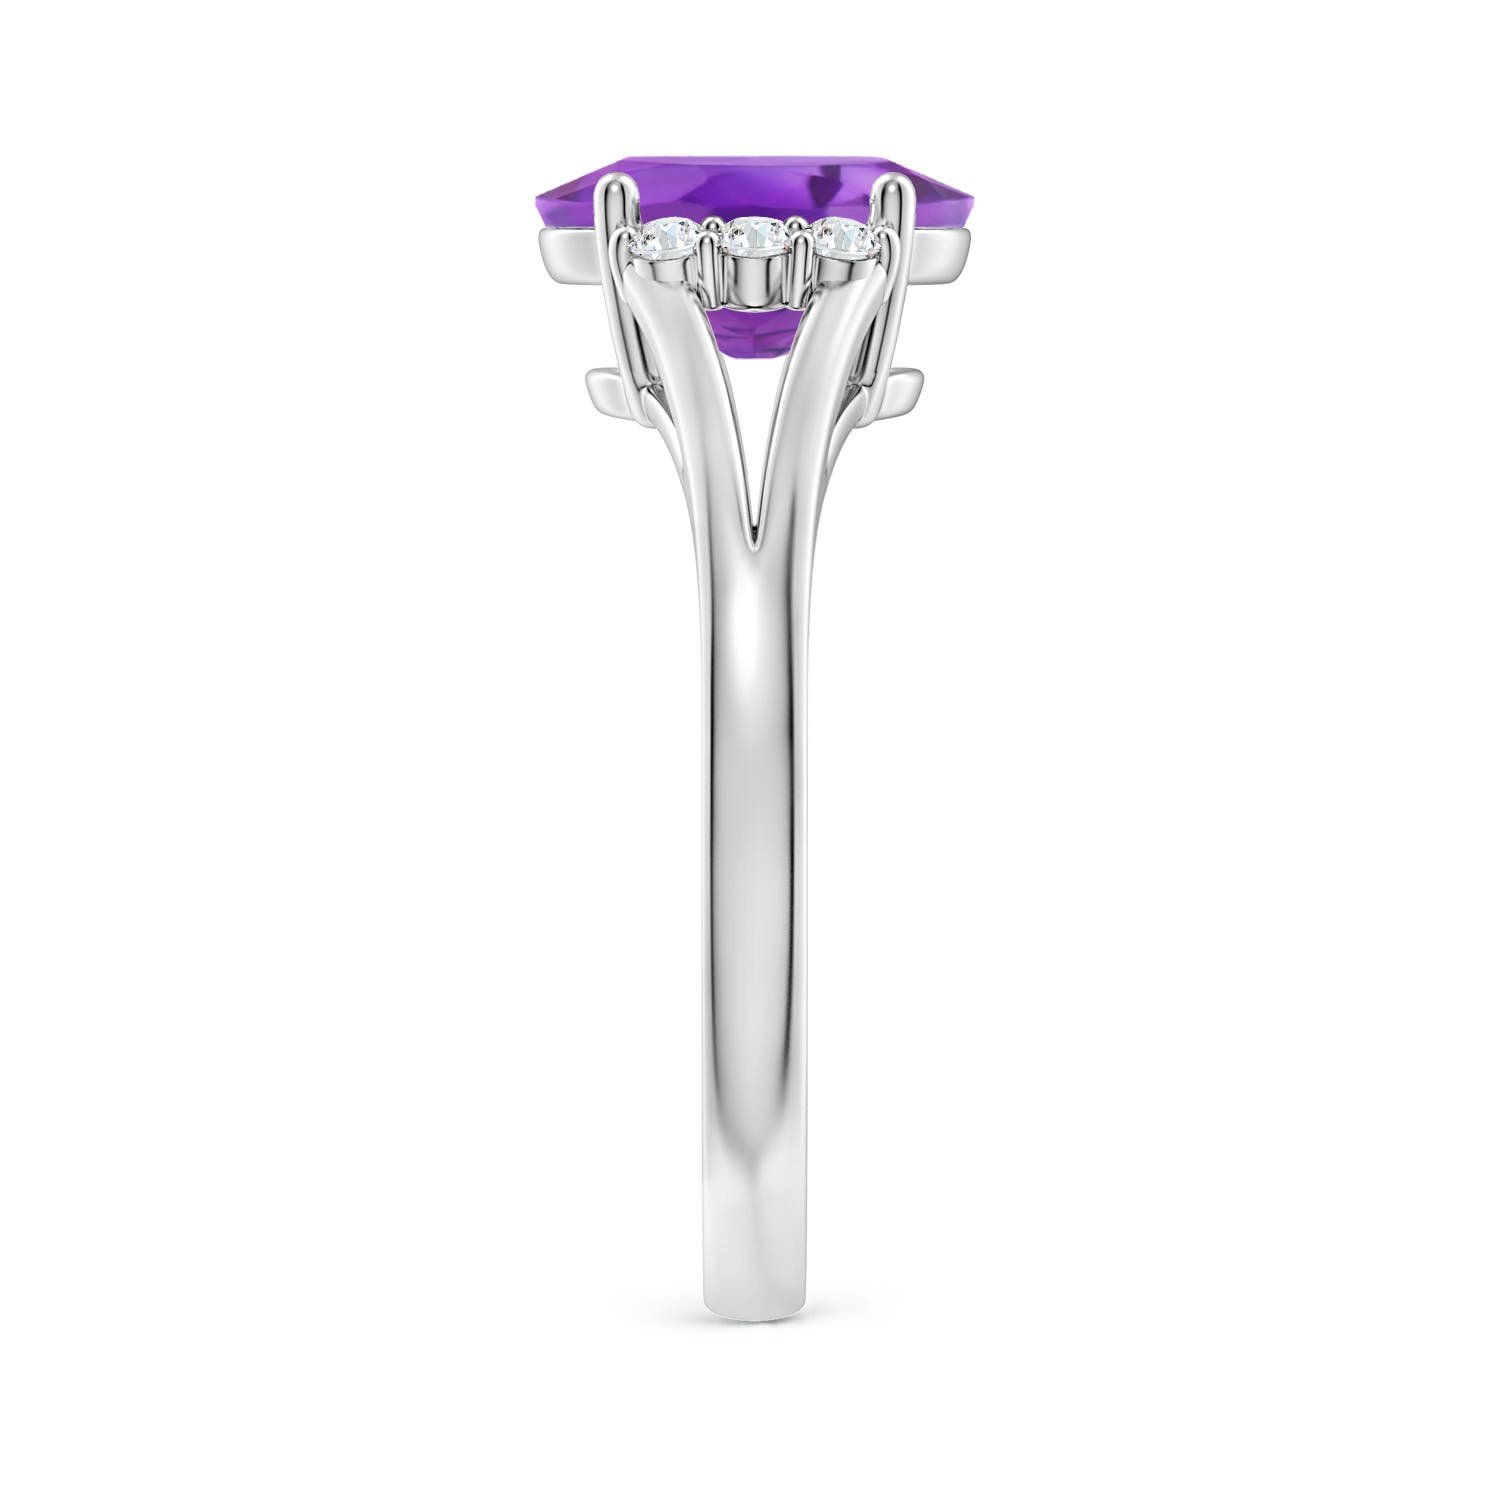 AA - Amethyst / 1.71 CT / 14 KT White Gold